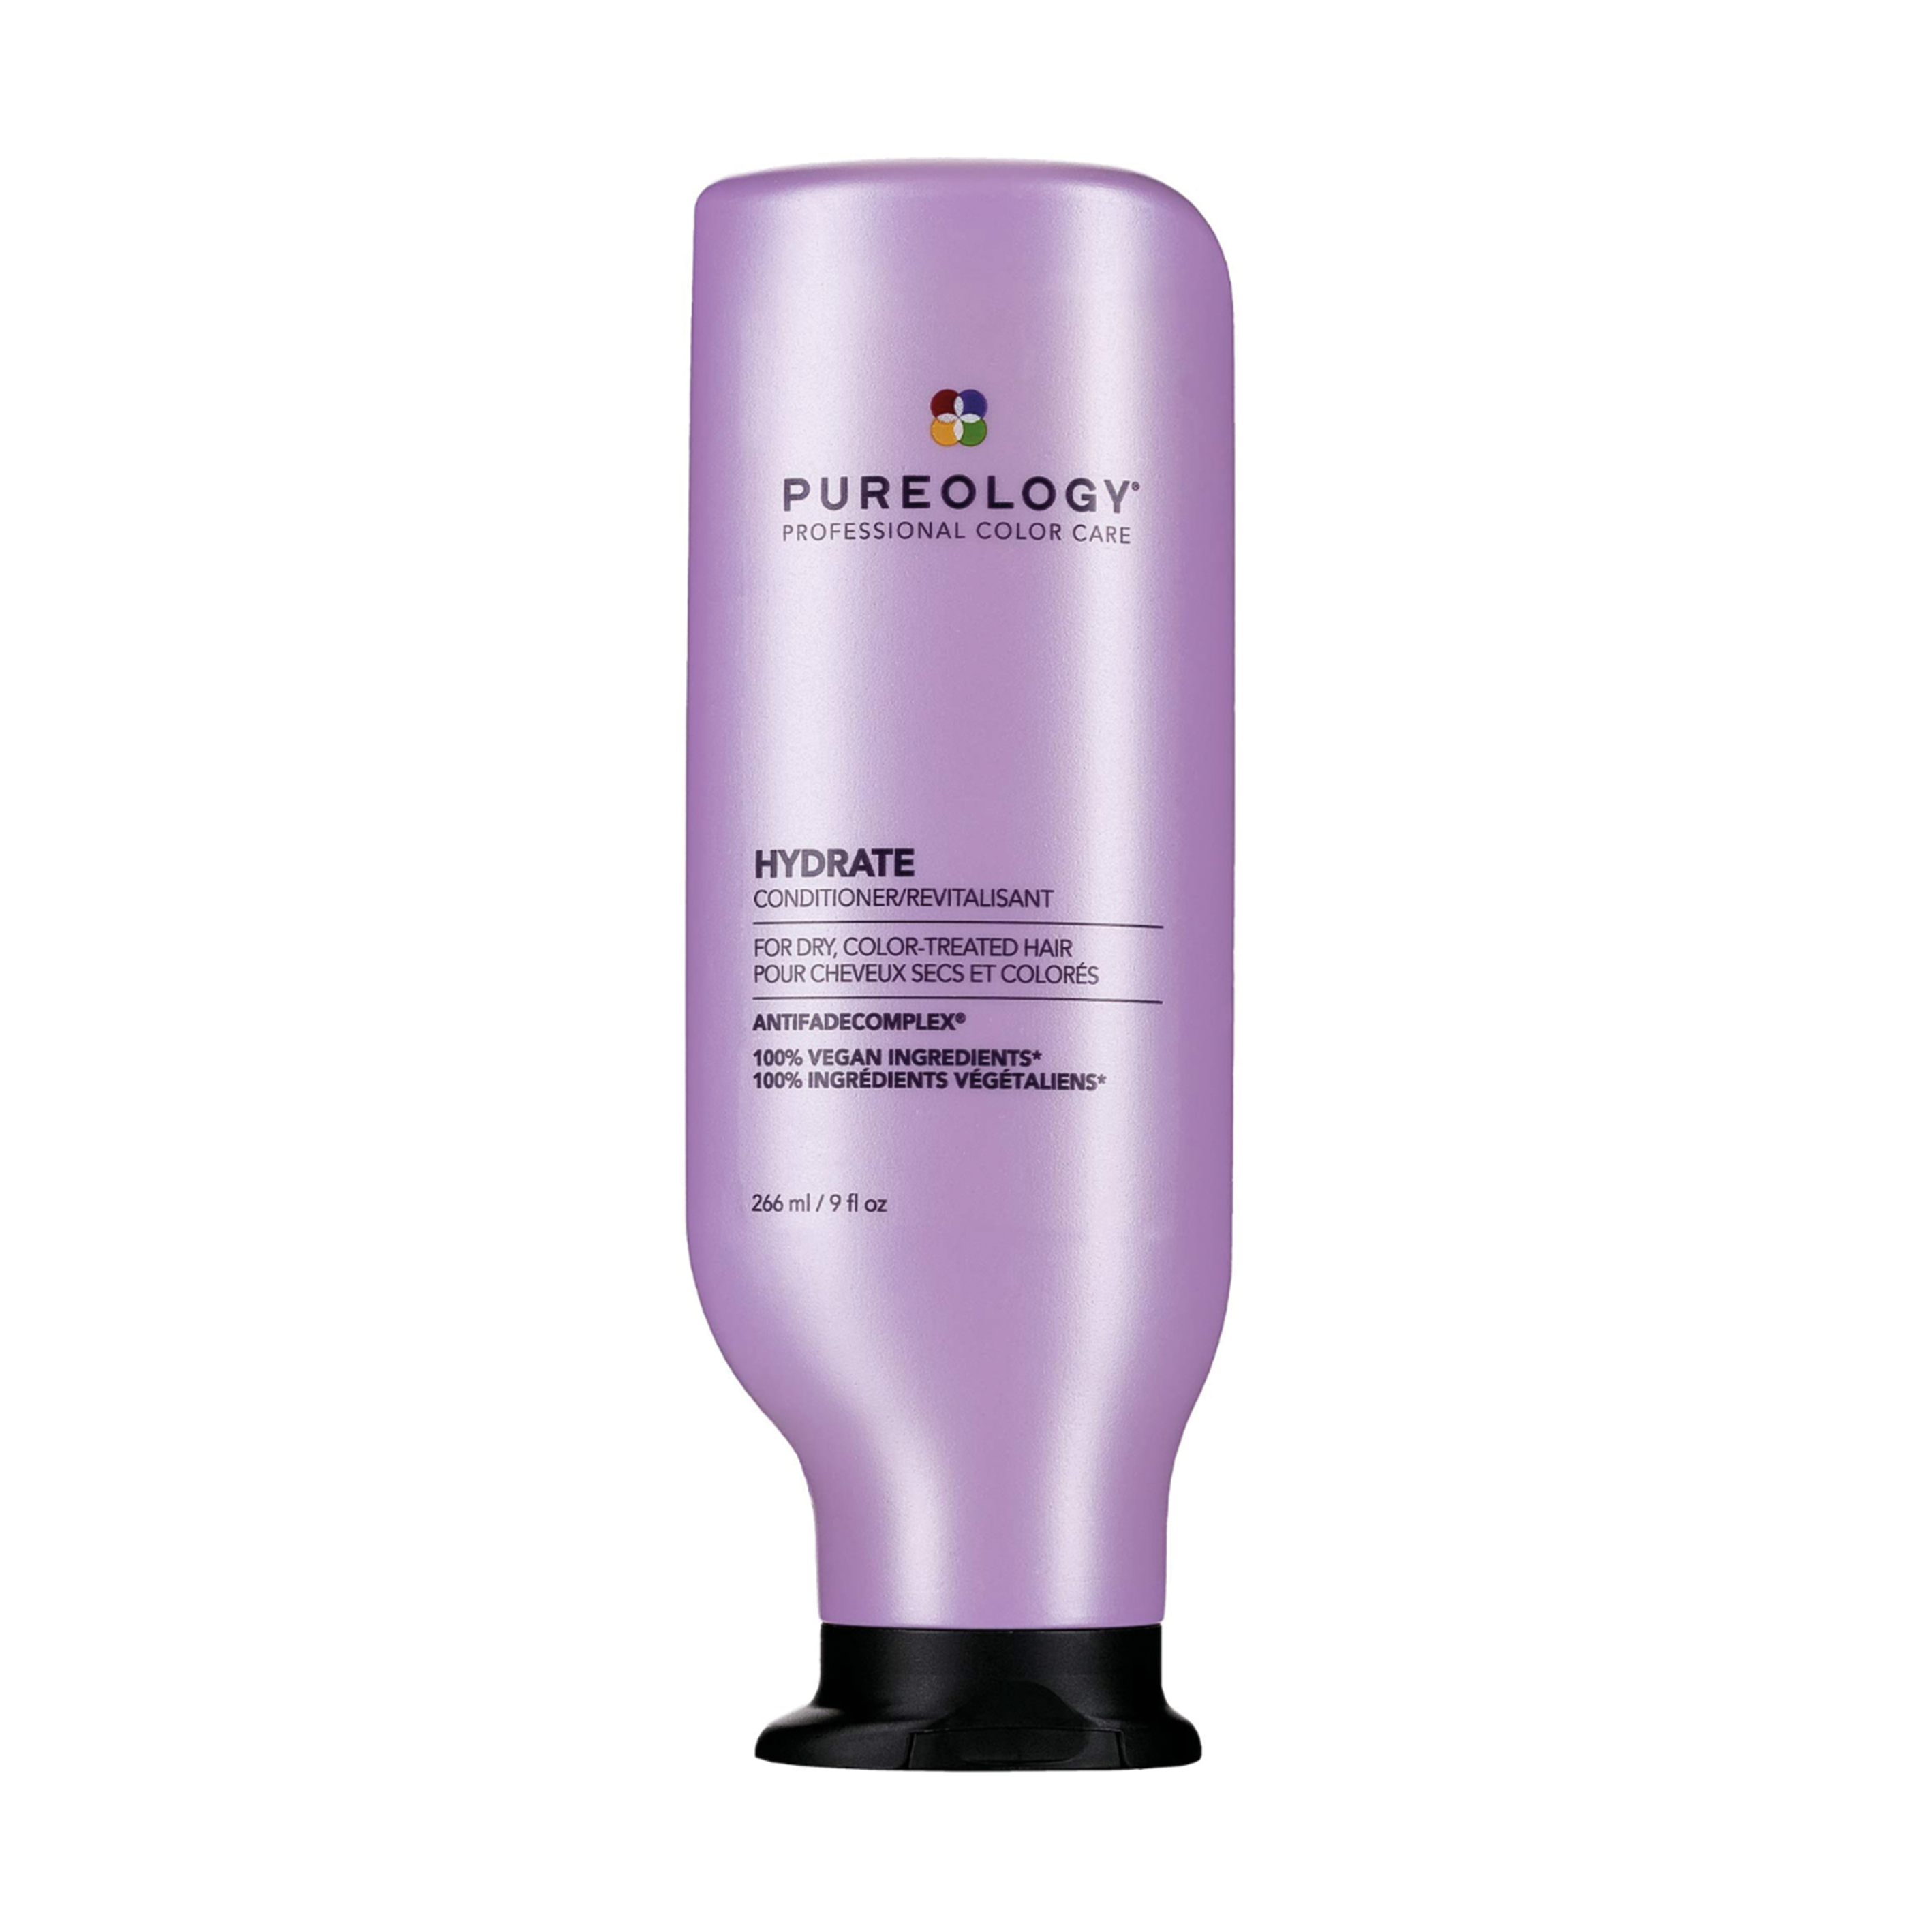 Pureology Hydrate Conditioner (266ml)